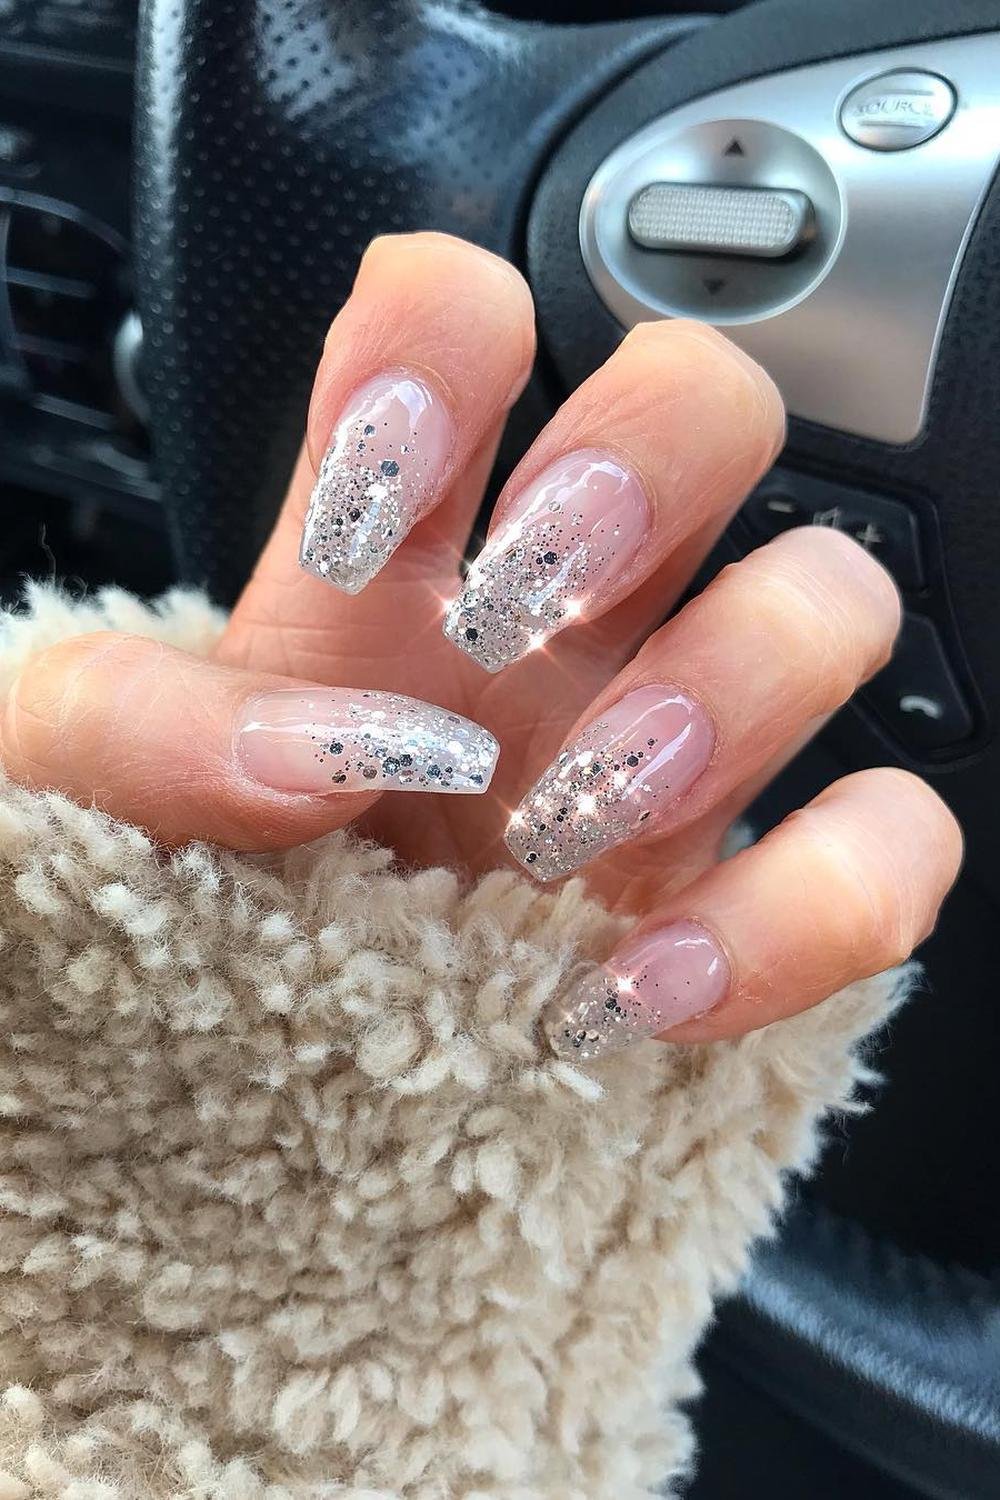 21 - Picture of Silver Glitter Nails